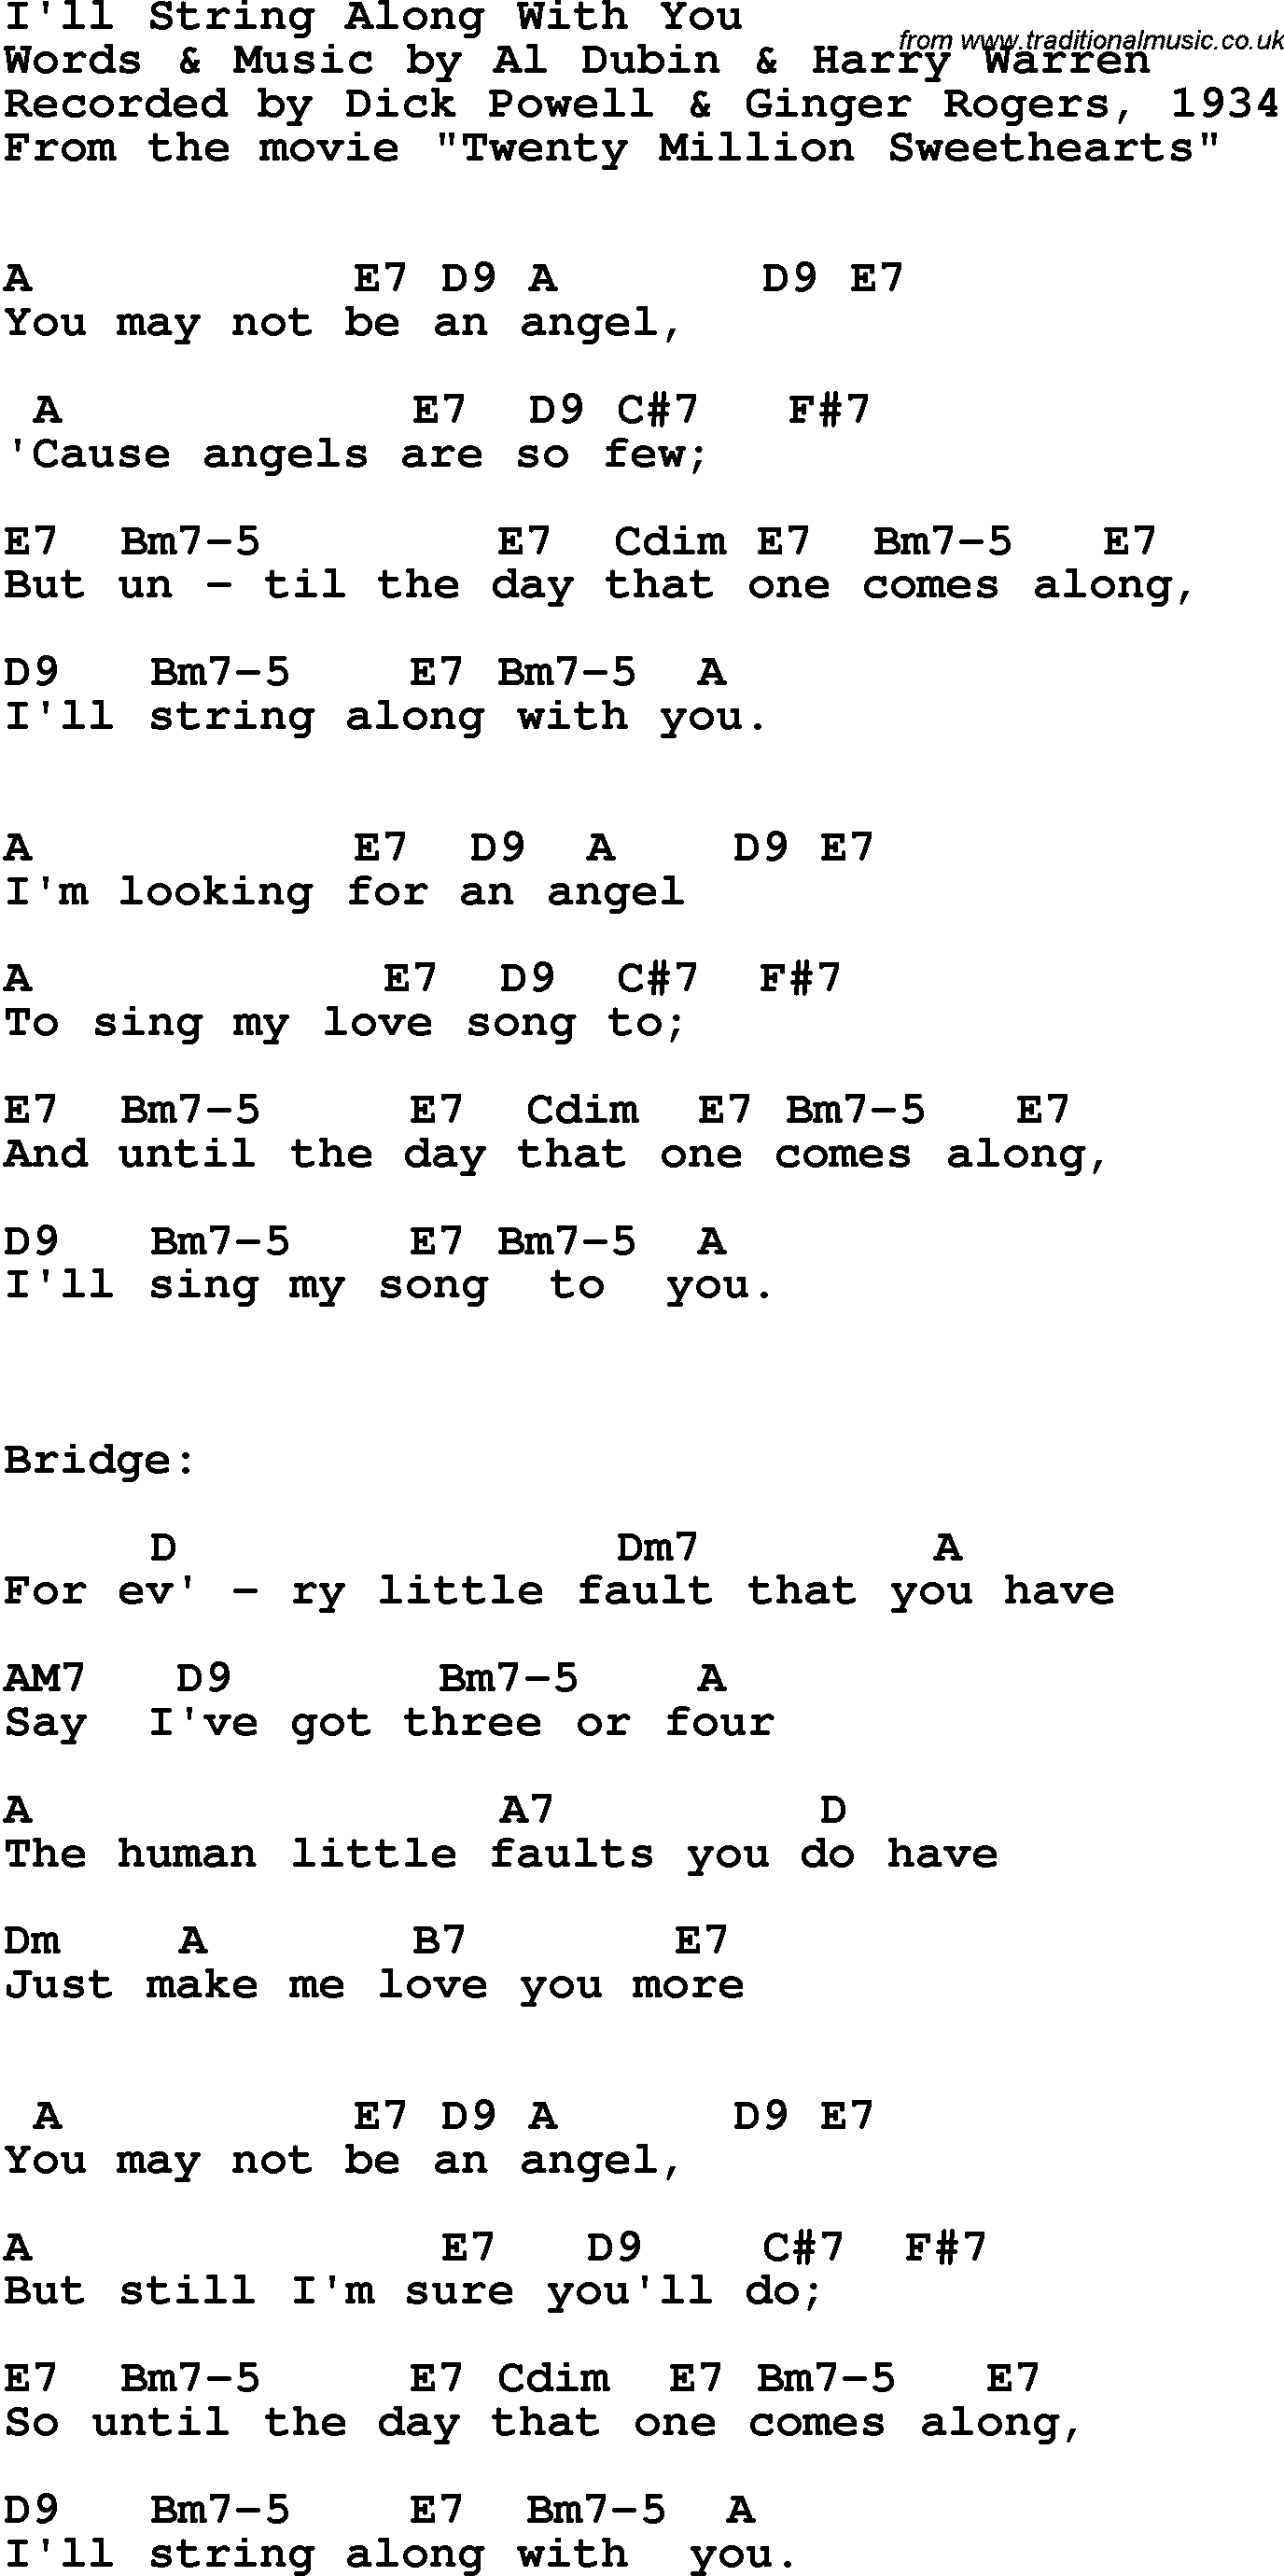 Song Lyrics with guitar chords for I'll String Along With You - Dick Powell & Ginger Rogers, 1934